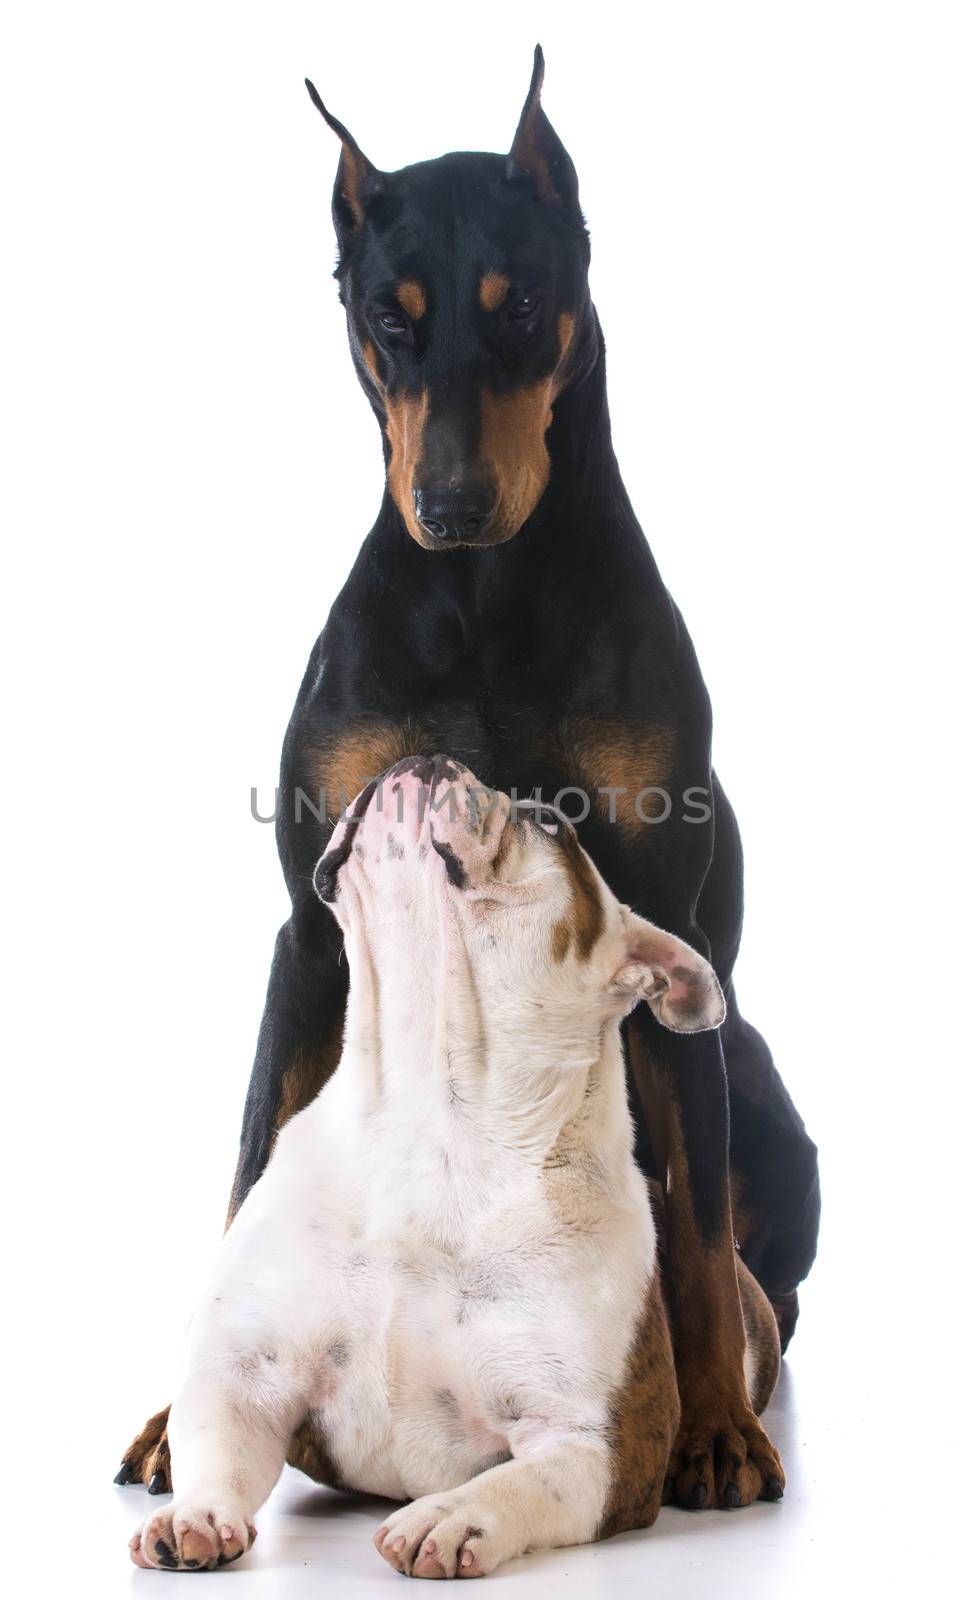 two dog - bulldog looking up at doberman on white background